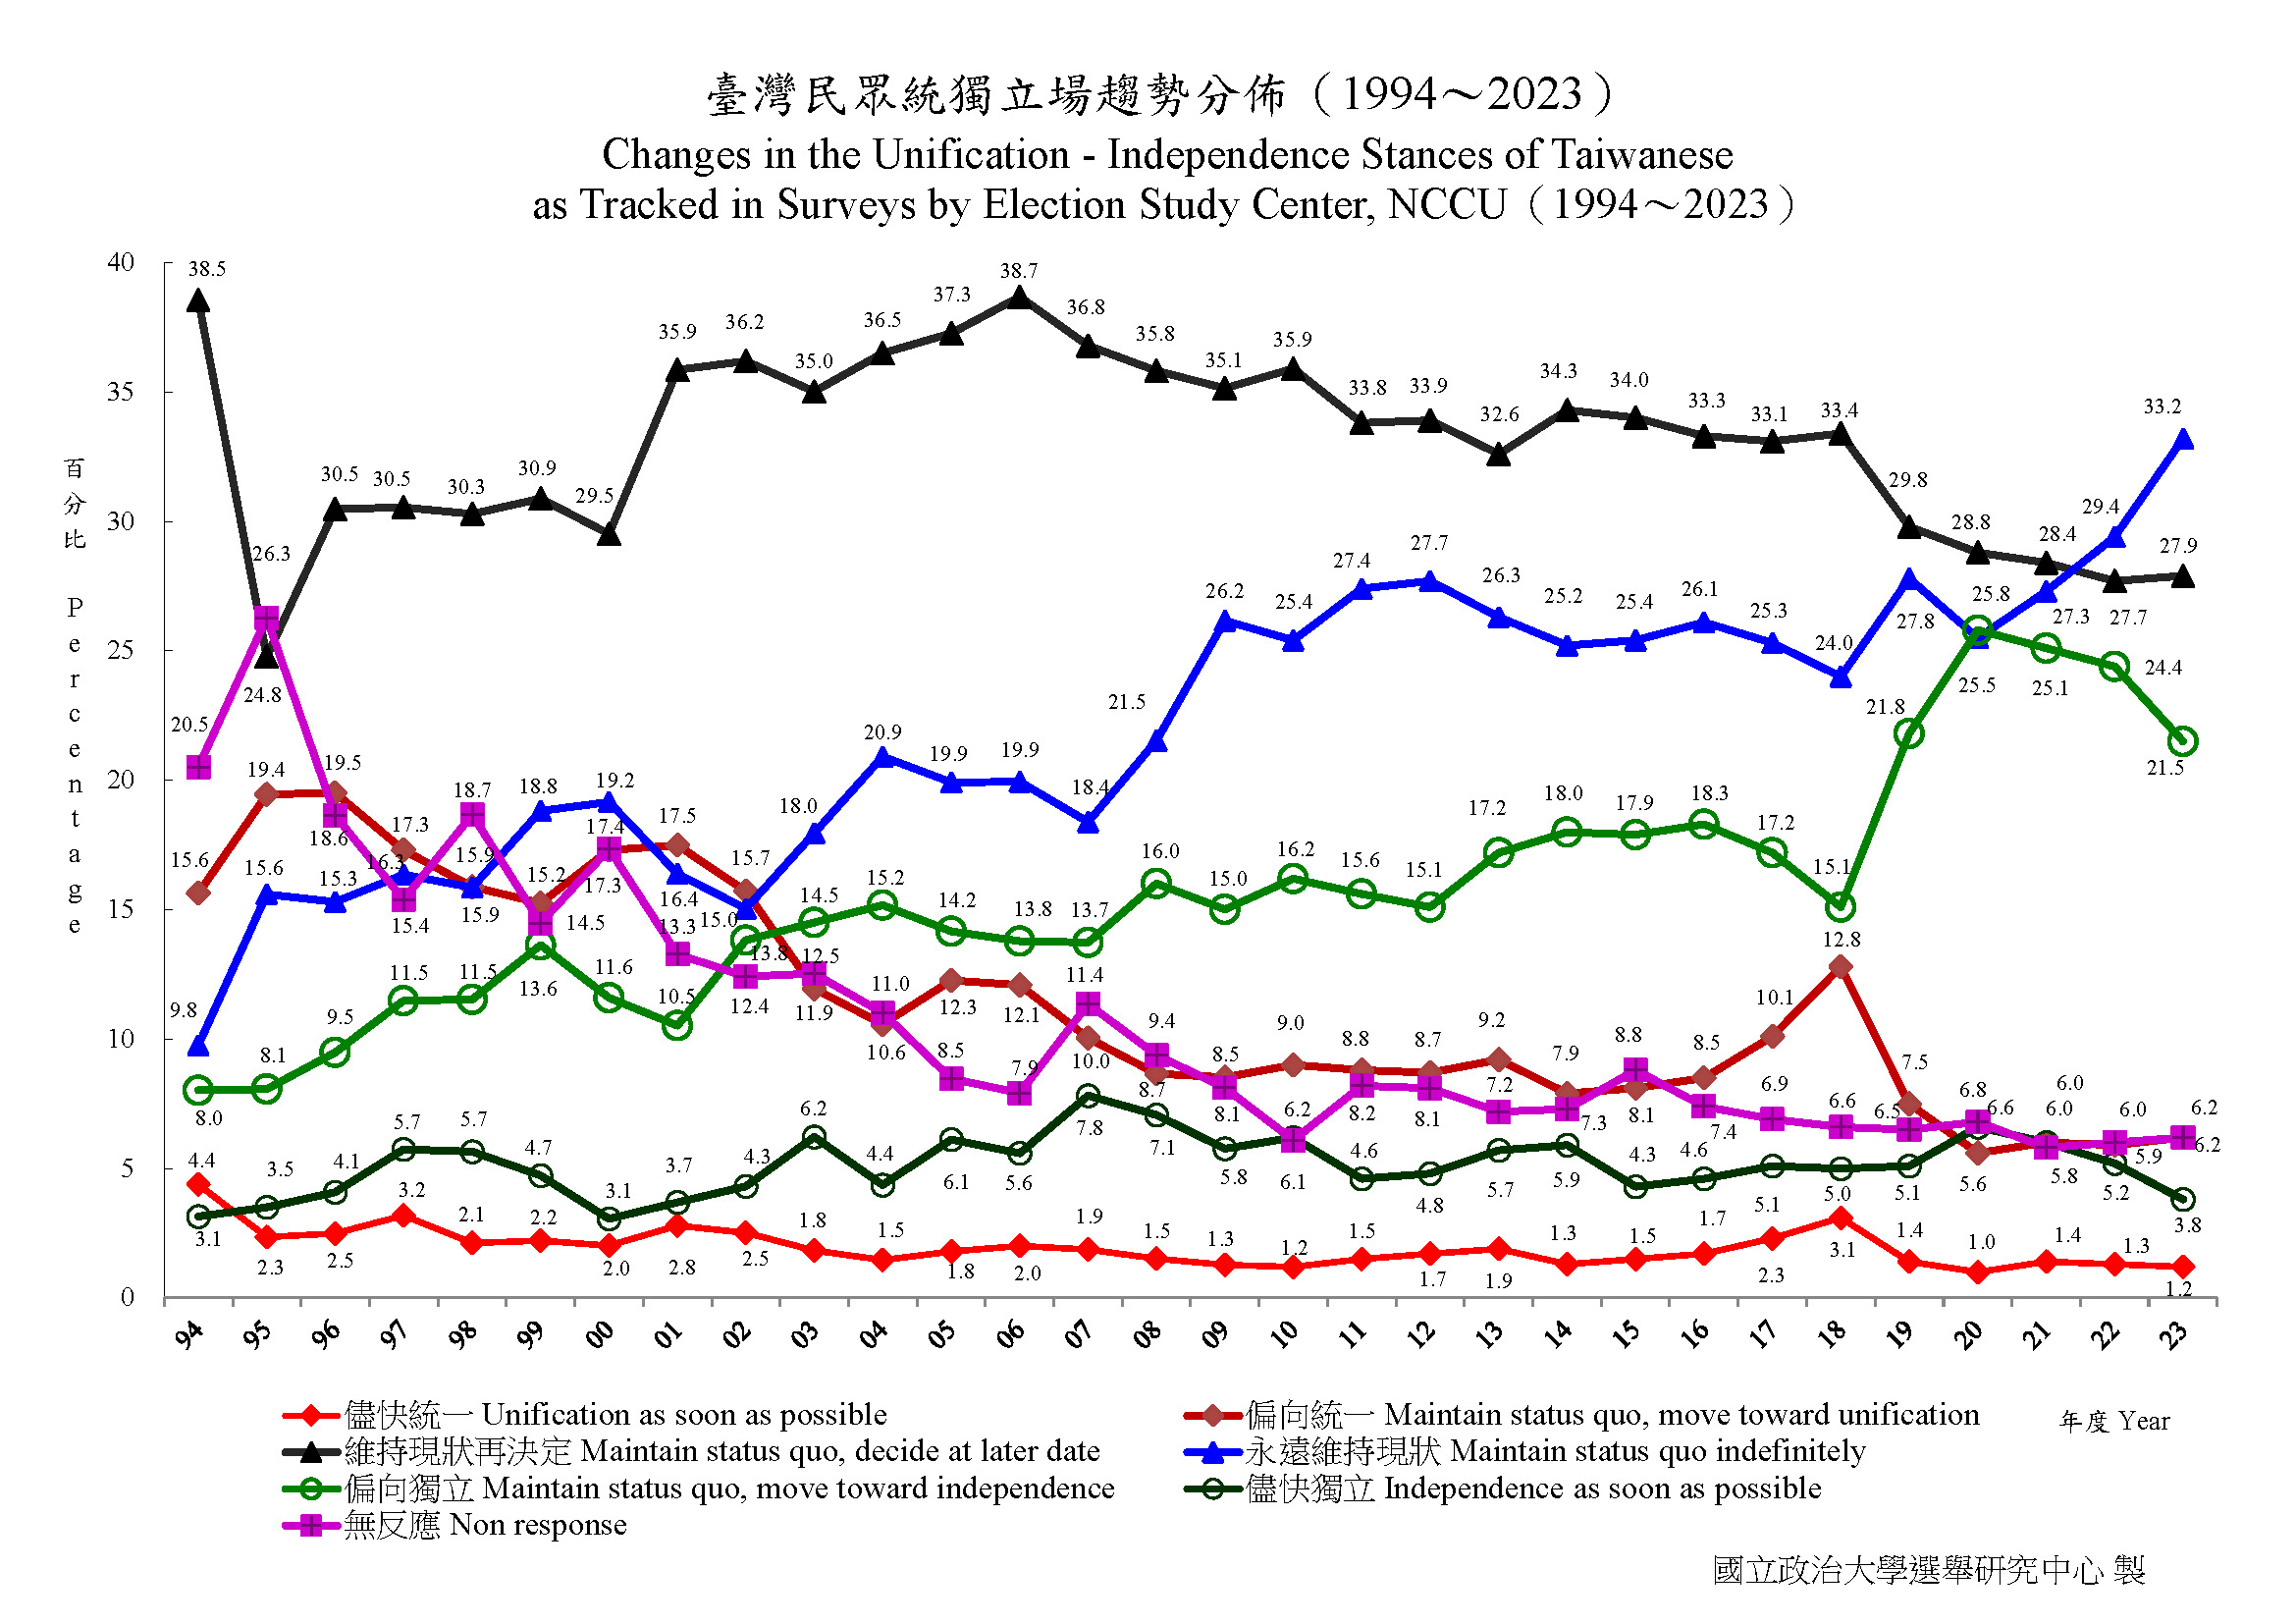 Taiwan Independence vs. Unification with the Mainland(1994/12~2023/12)